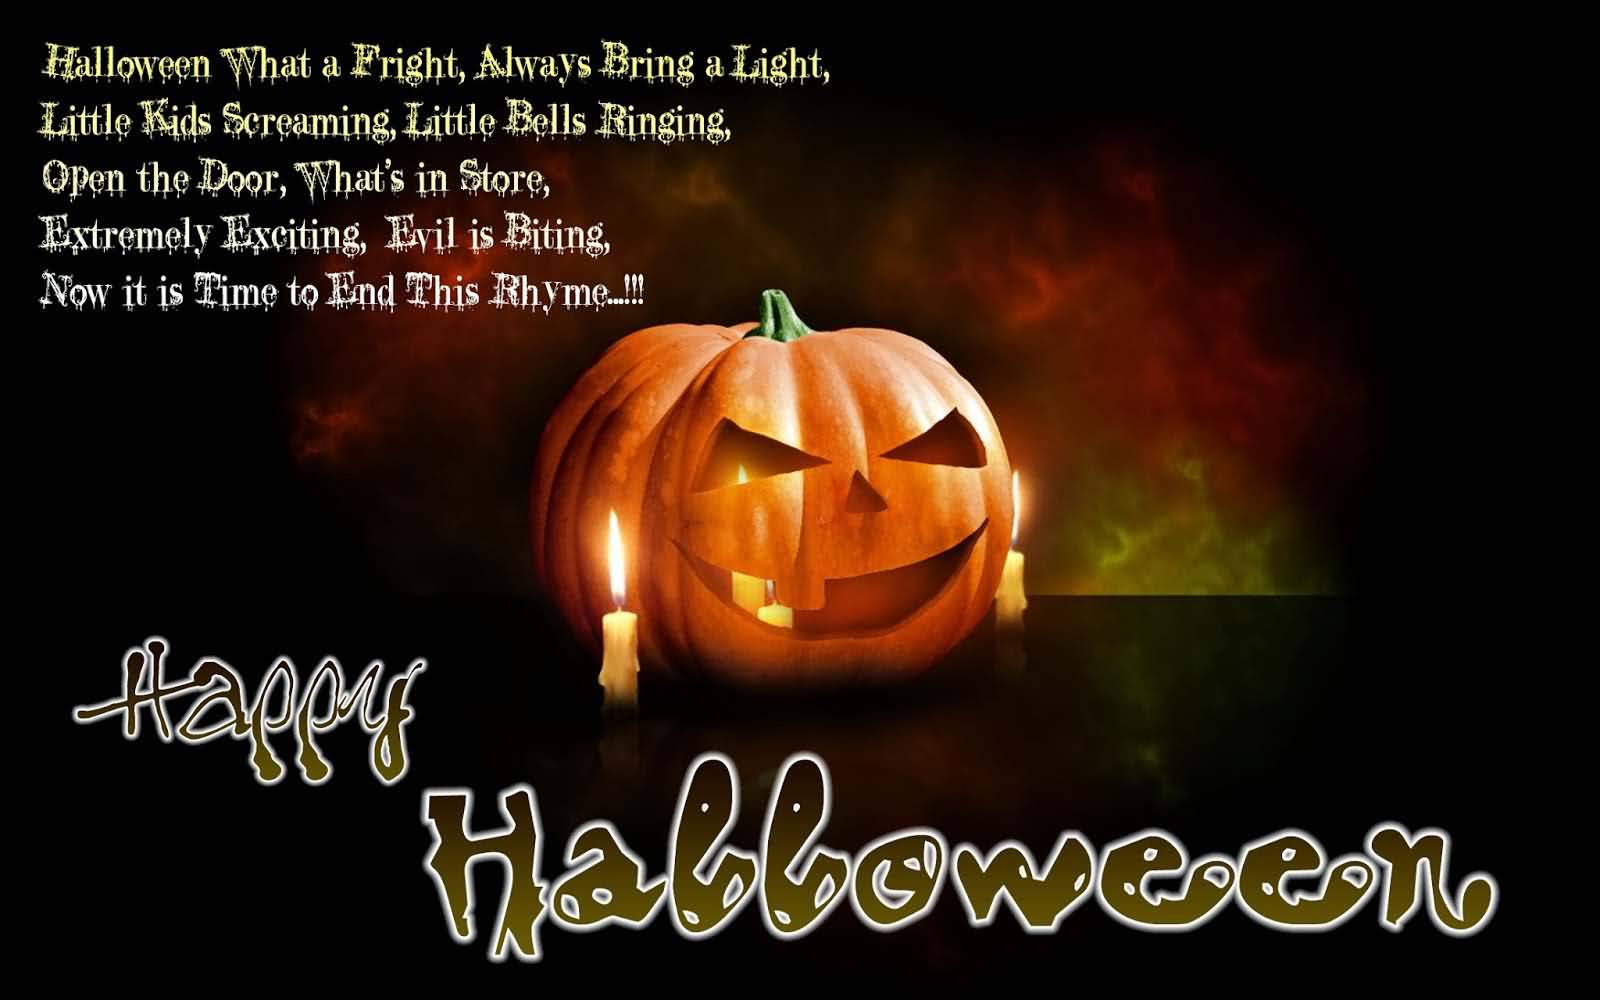 Halloween What A Fright, Always Bring A Light Little Kids Screaming Little Bells Ringing Happy Halloween Poem